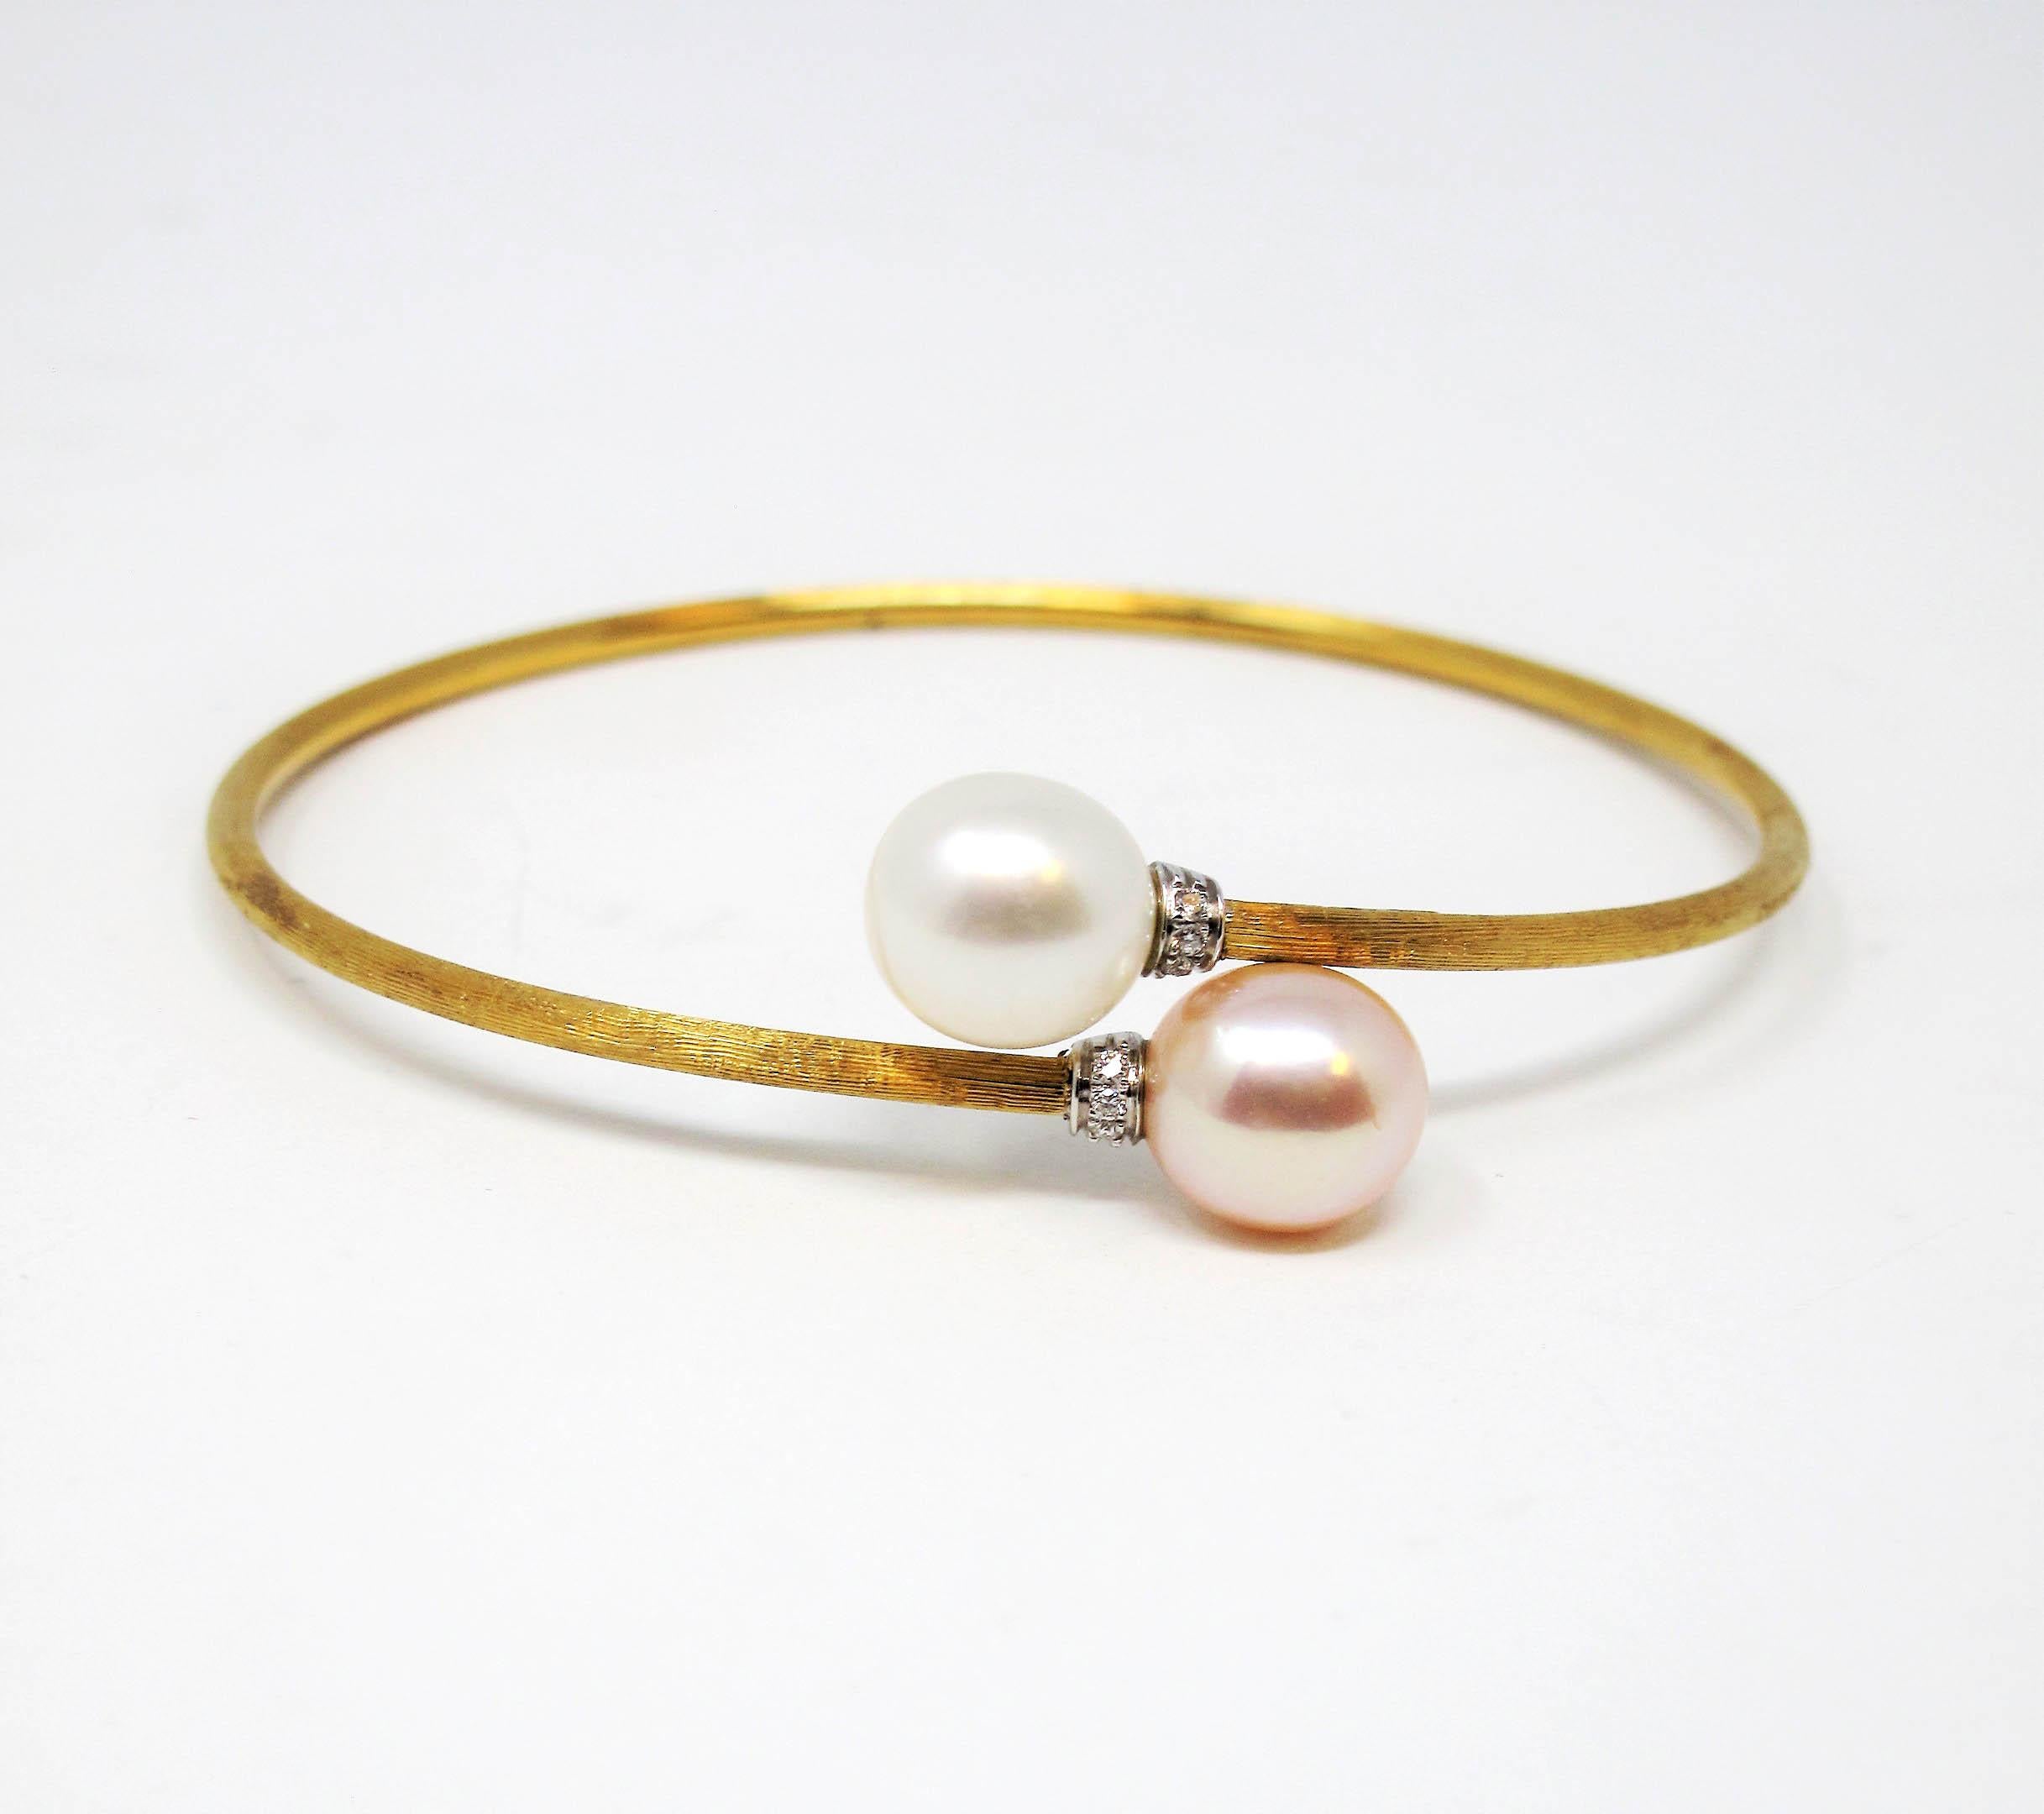 Gorgeous, ultra feminine diamond and cultured pearl bracelet by Italian jewelry designer, Marco Bicego. With its ultra thin band, soft pink and white pearls, and just a touch of diamond sparkle, this bracelet is the perfect choice for an understated